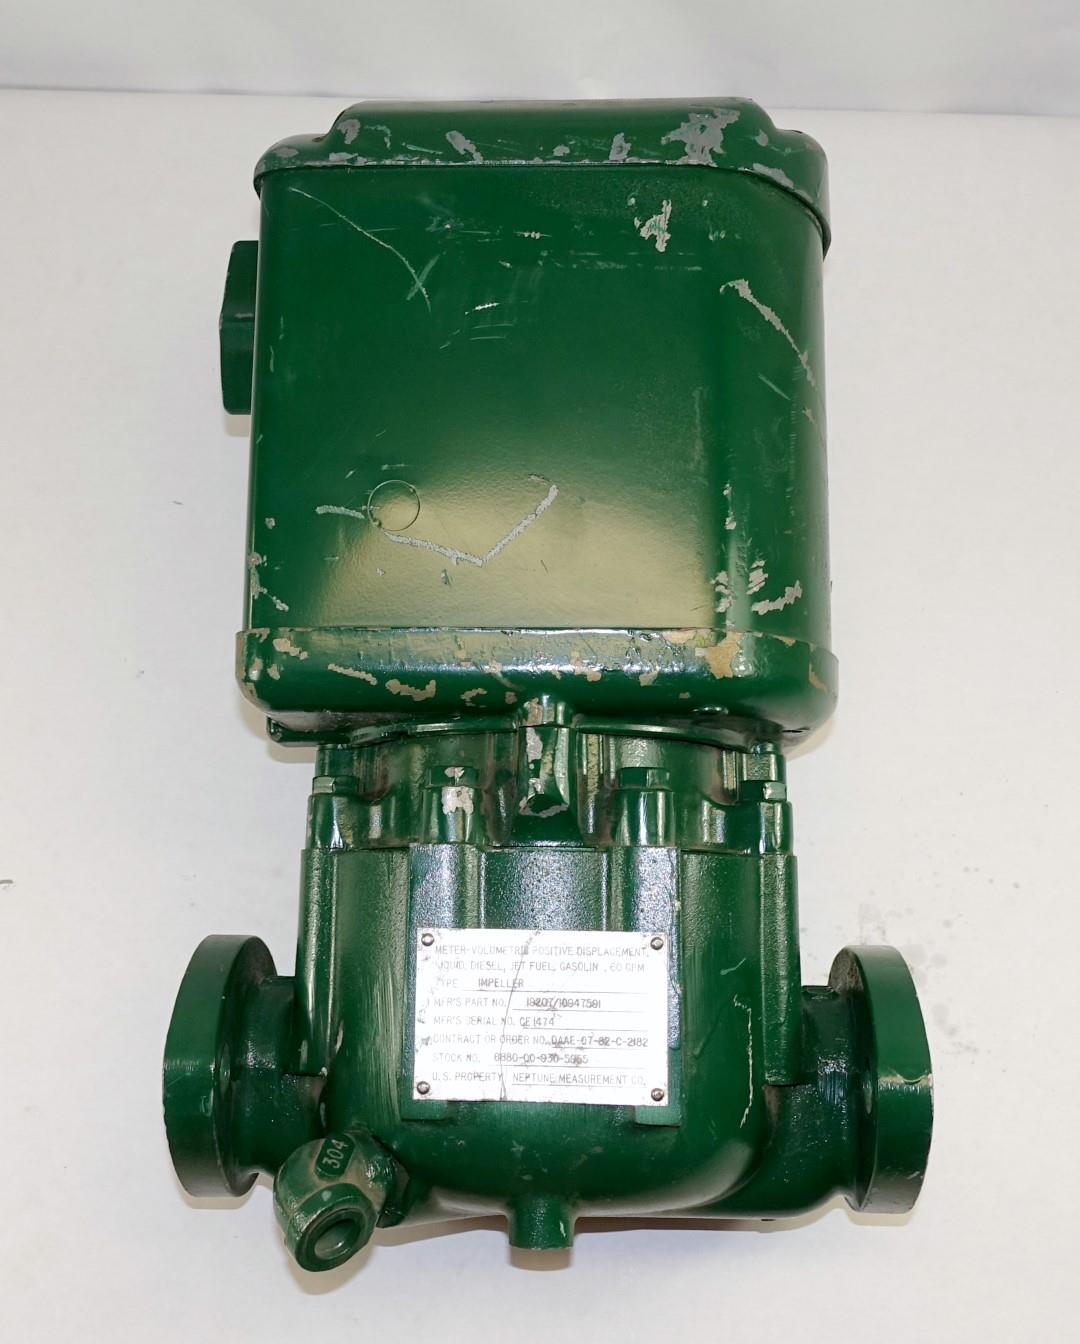 M35-668 | 6680-00-930-5955 Neptune Fuel Meter Model 431 for M49A2C Fuel Truck USED (6).JPG